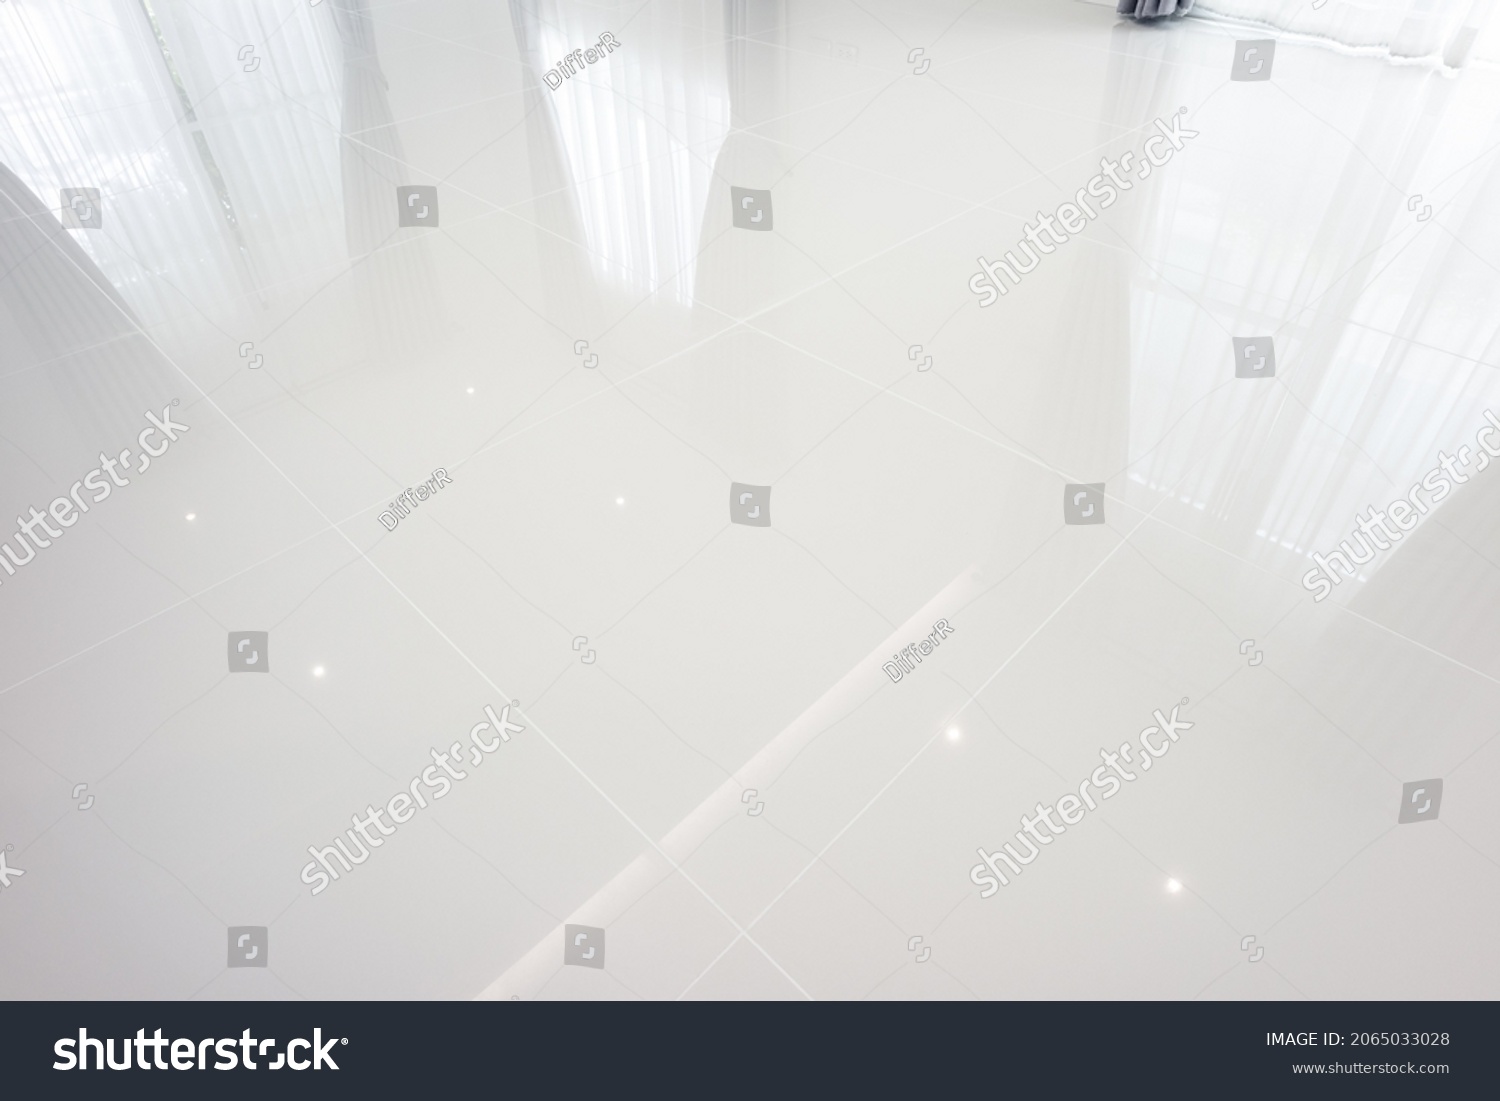 White tile floor with grid line of square texture pattern in perspective. Clean shiny of ceramic surface. Modern interior home design for bathroom, kitchen and laundry room. Empty space for background #2065033028